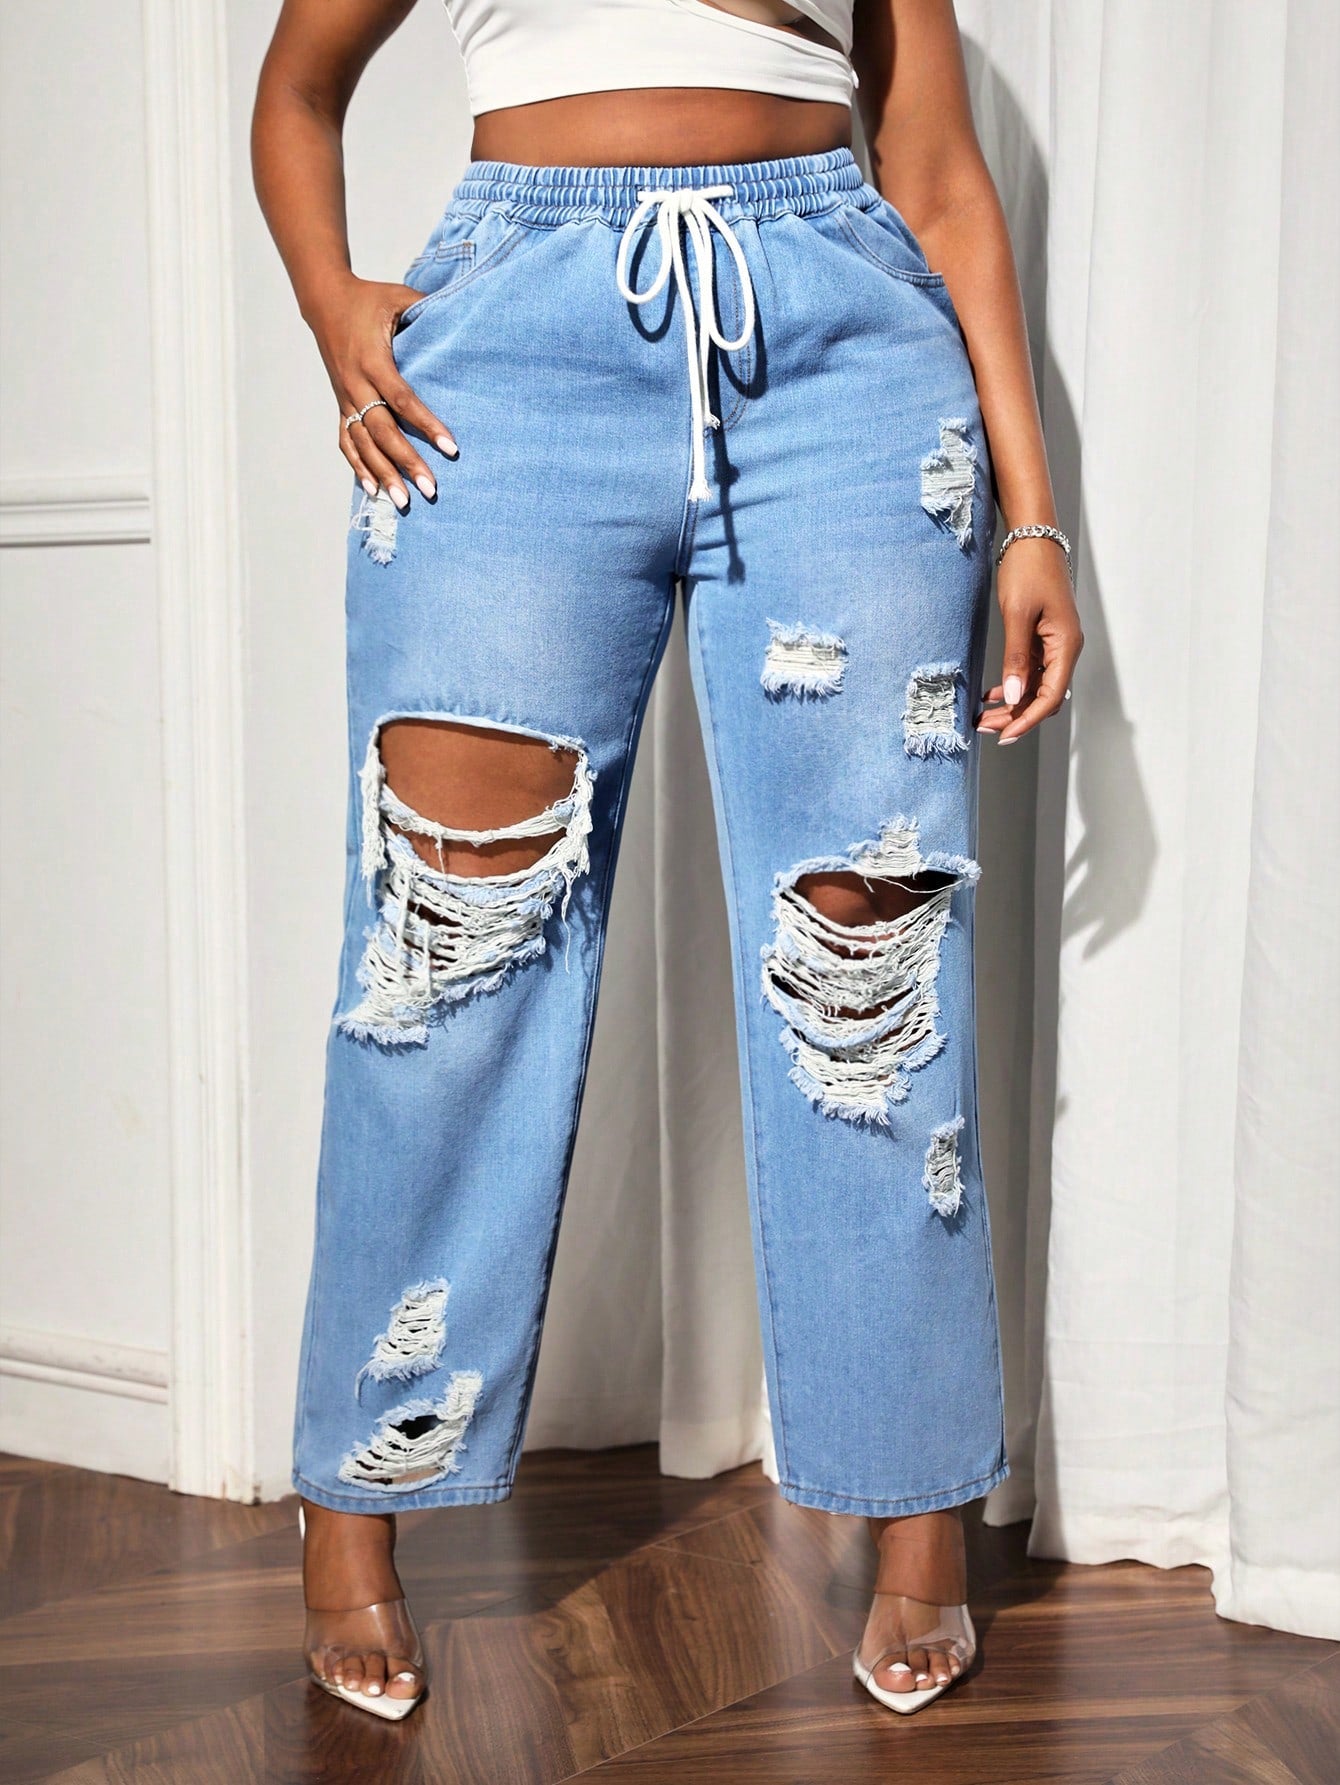 Plus Size Elastic-Free Stylish Distressed Jeans With Drawstring Waistband And Loose Fit